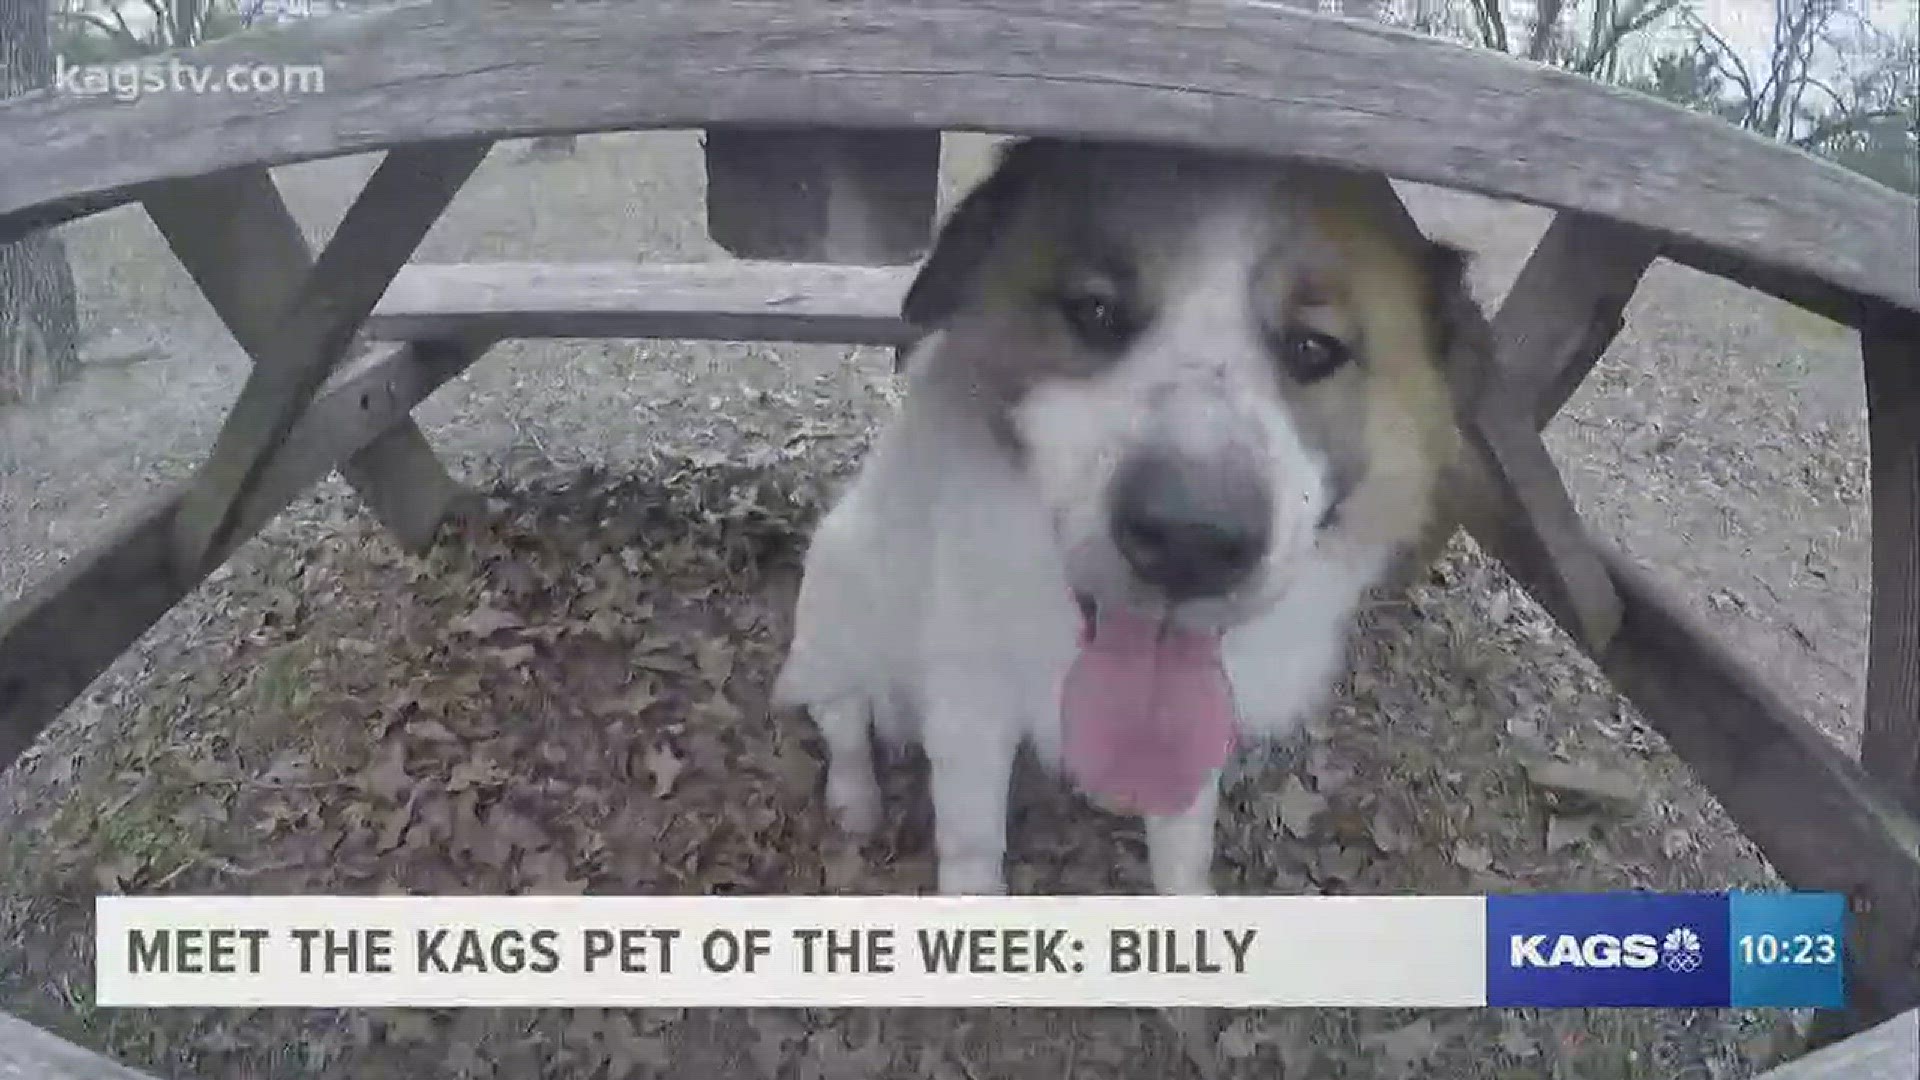 Our KAGS Pet of The Week this week is Billy. This ball of fluff is a bundle of energy, loves to run around the yard, and will make the perfect best friend.